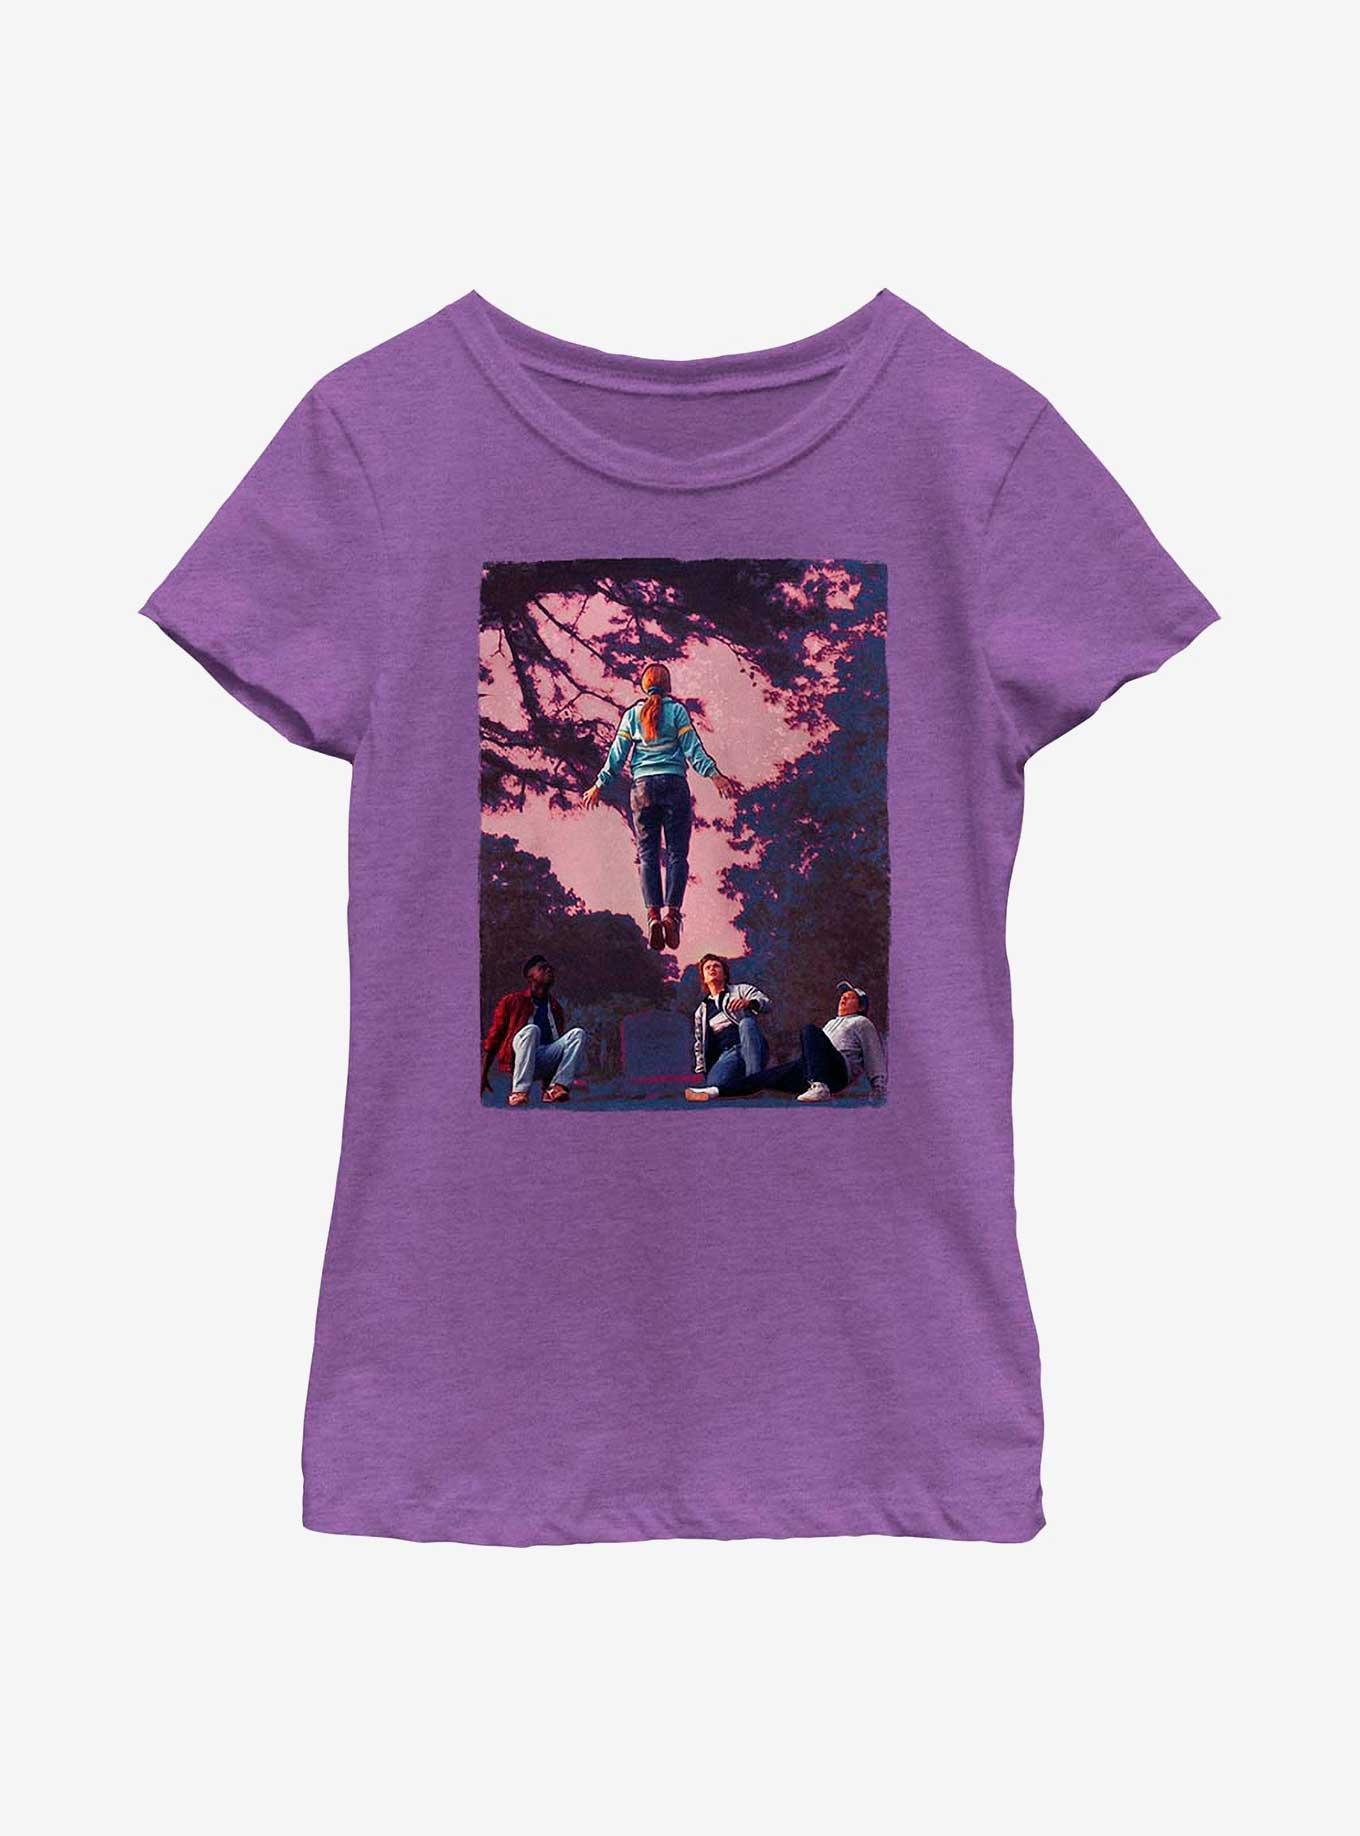 Stranger Things Floating Max Youth Girls T-Shirt, PURPLE BERRY, hi-res